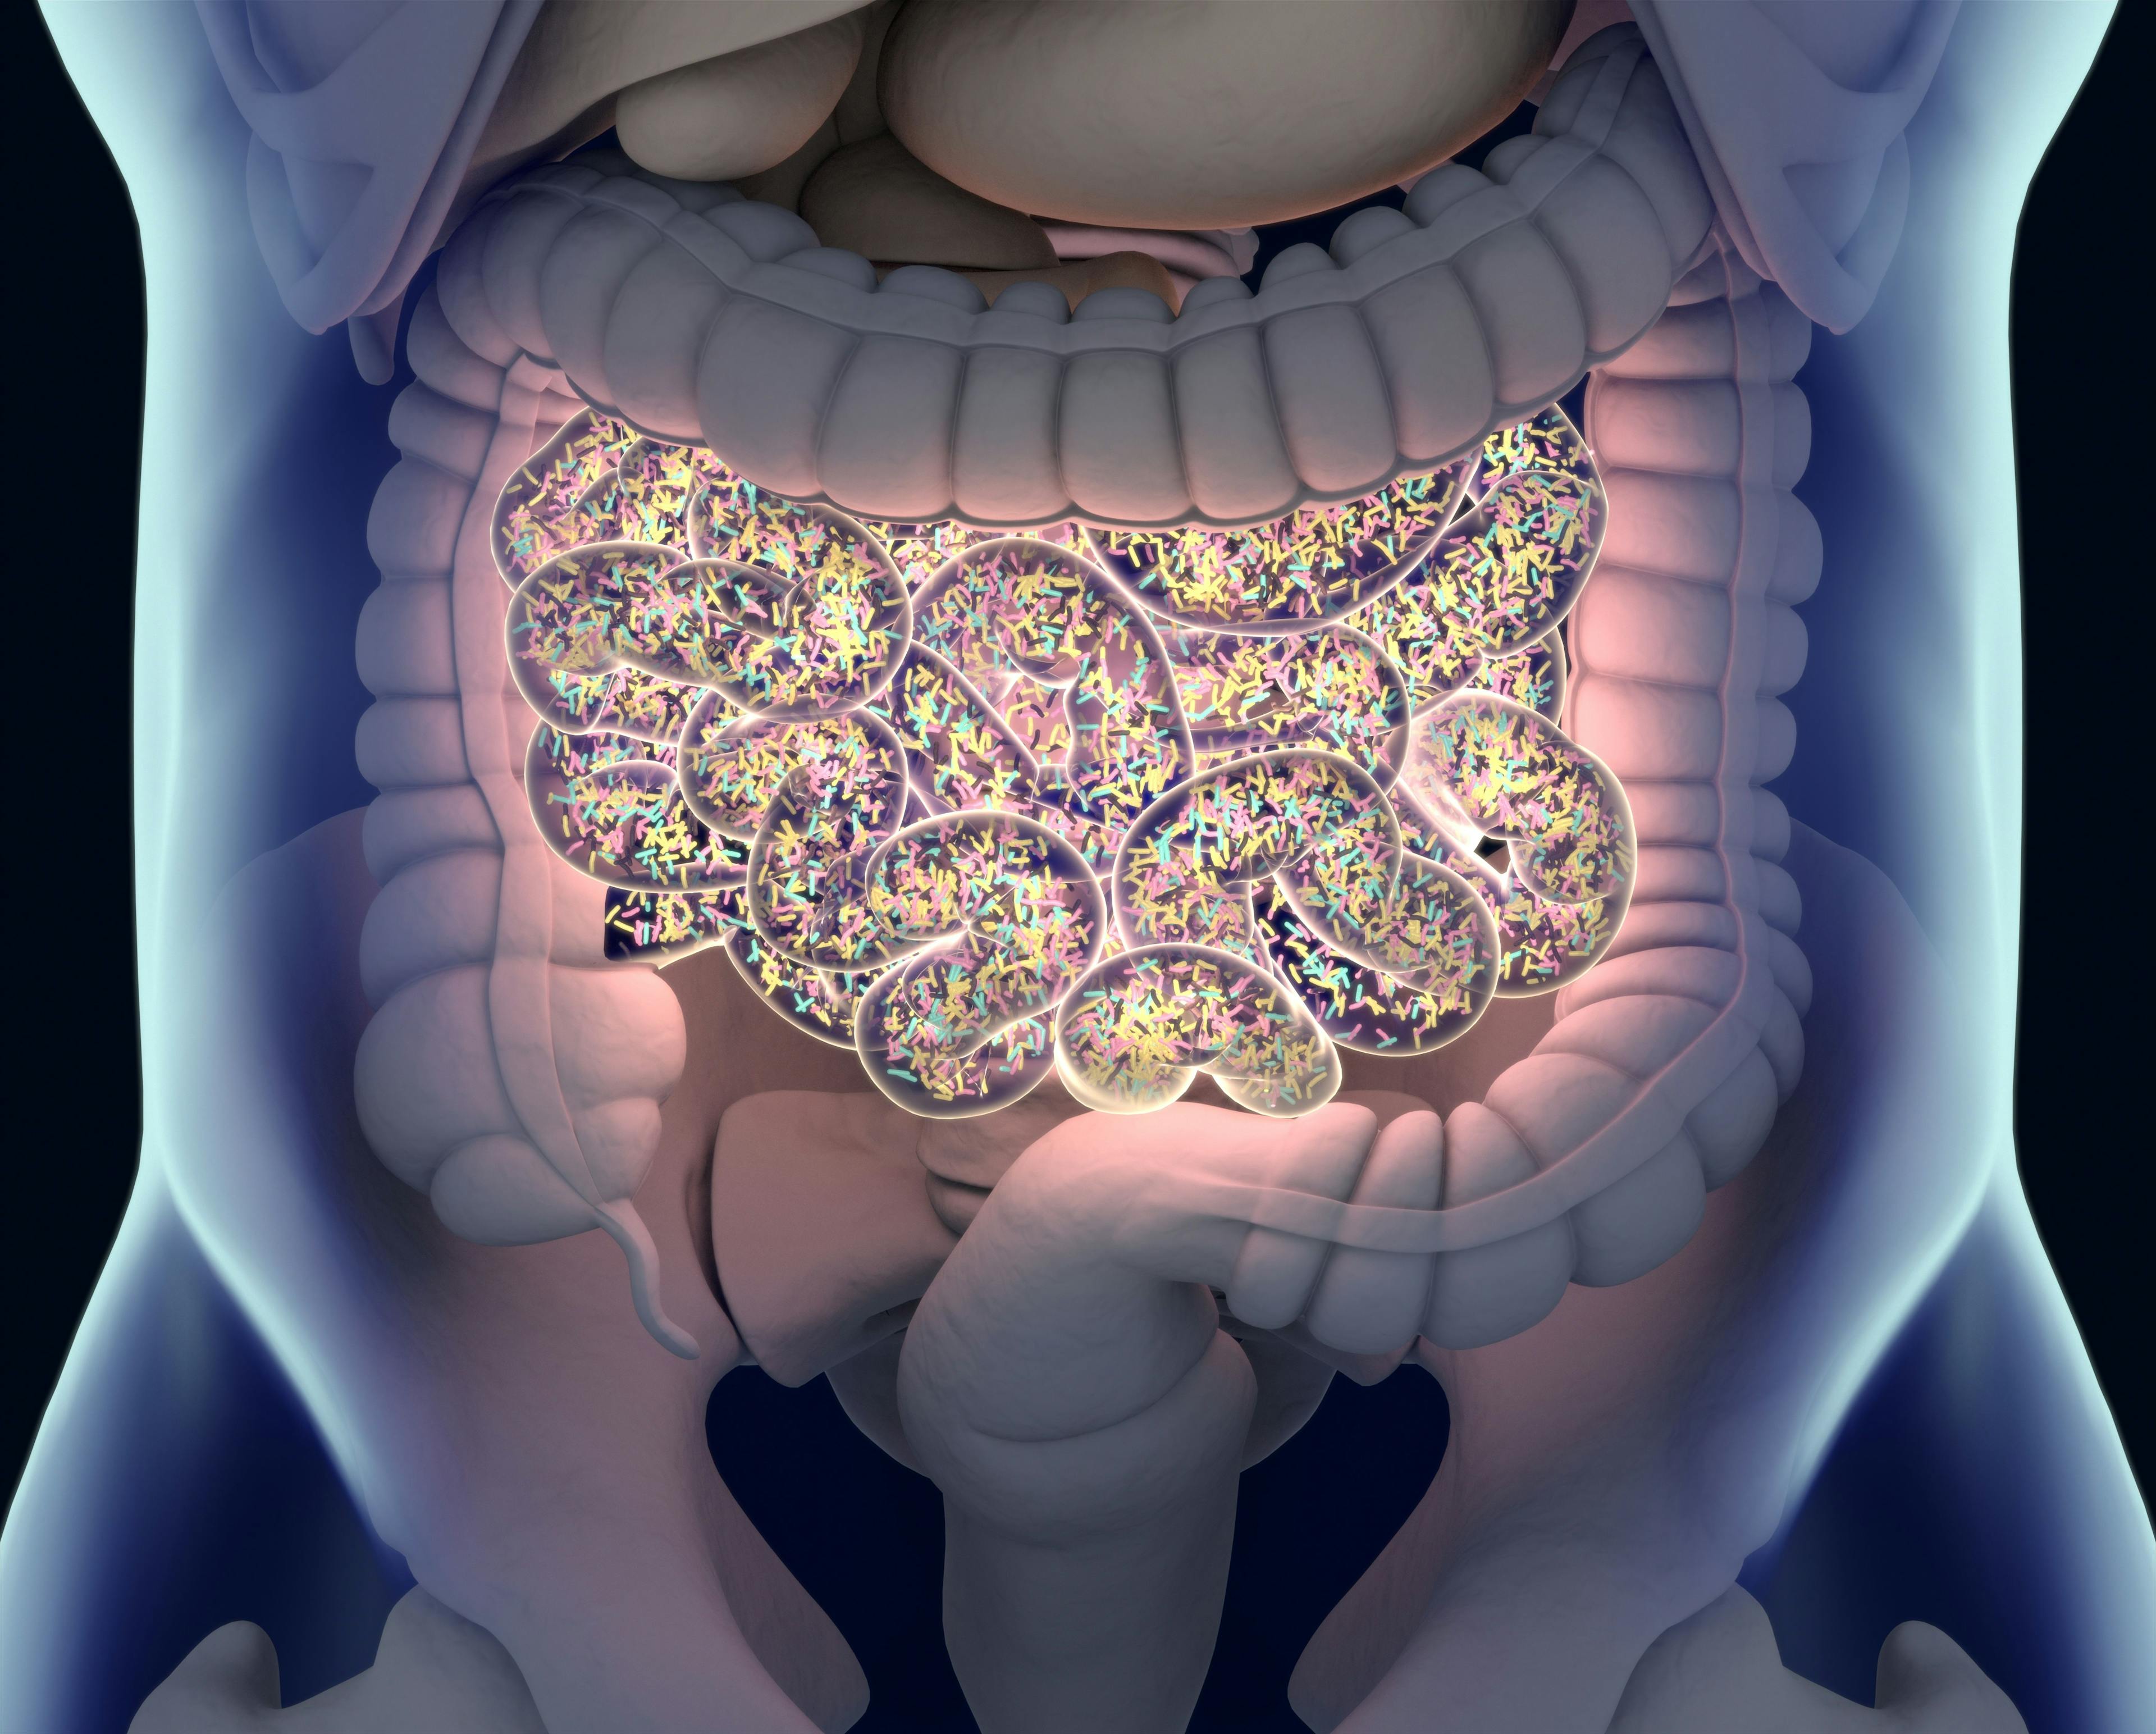 Results from a randomized trial suggest that neoadjuvant FOLFOX may be an effective treatment for patients with locally advanced rectal cancer who are suitable to undergo sphincter-sparing surgery.